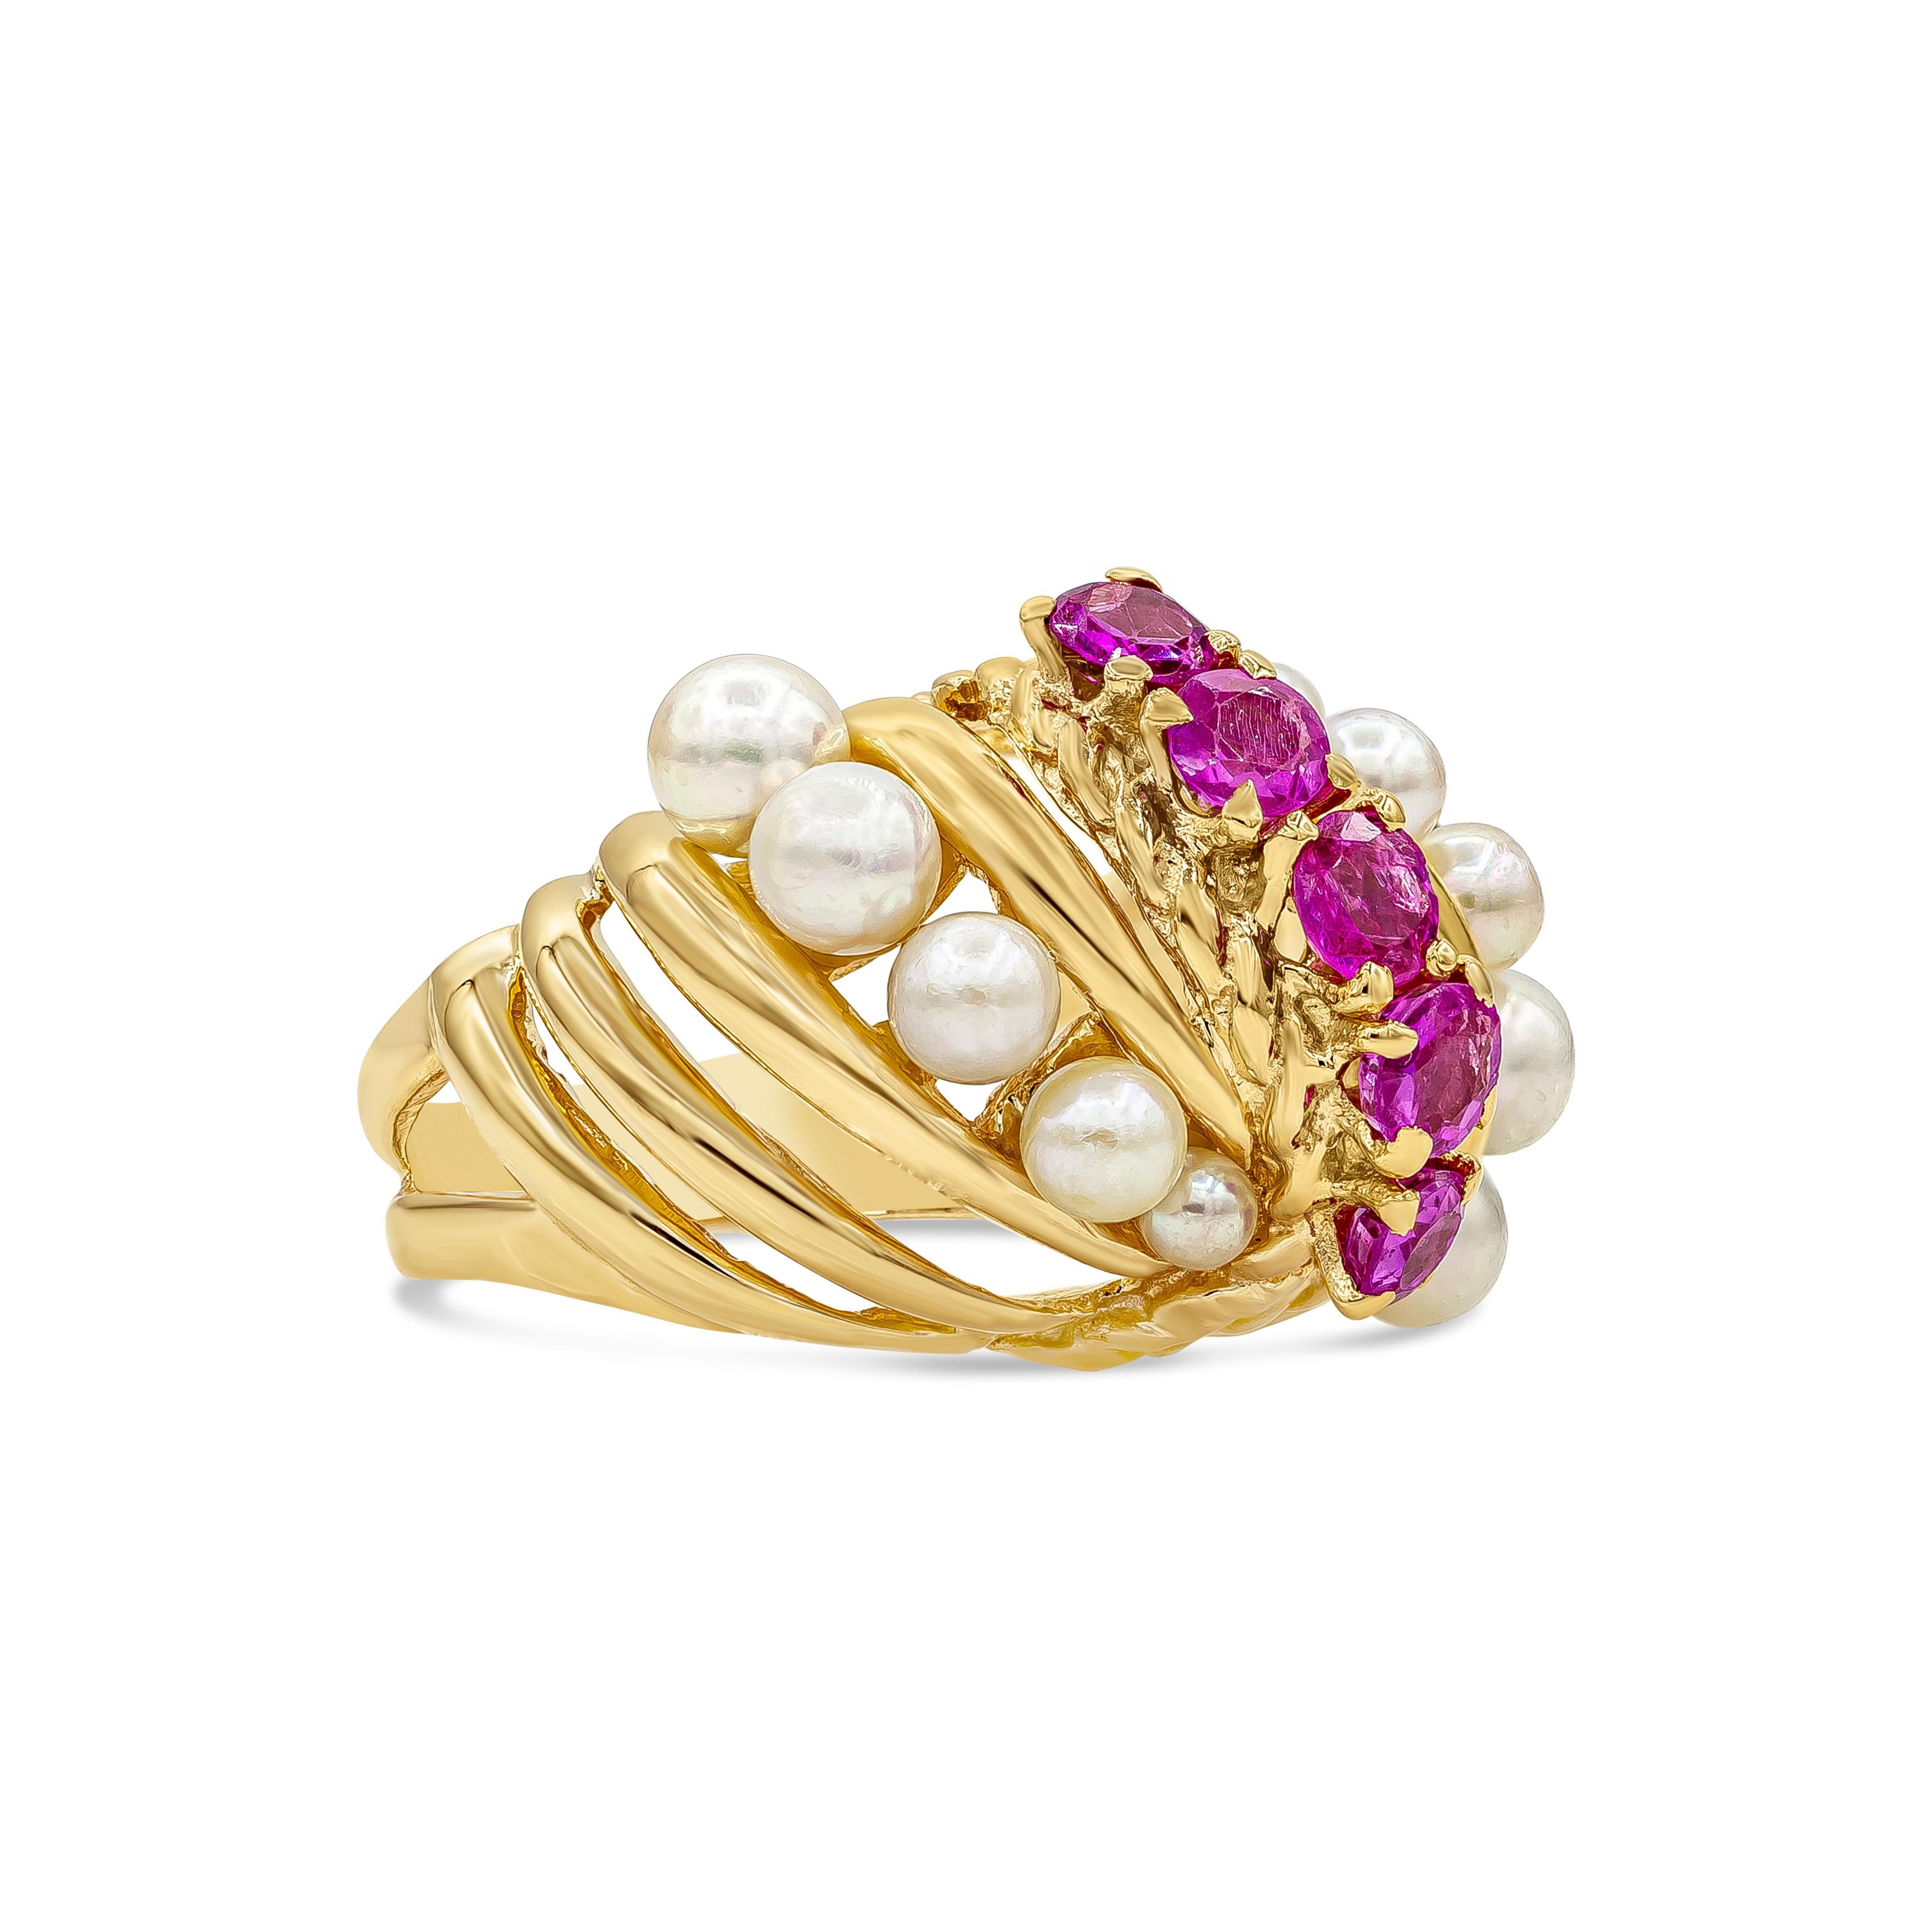 A fashionable cocktail ring featuring a row of round cut pink sapphires, accented on each side with a row of round pearls. Made in 14k yellow gold. Sapphires weigh approximately 1.01 carats total. Size 6 US resizable upon request.

Style available